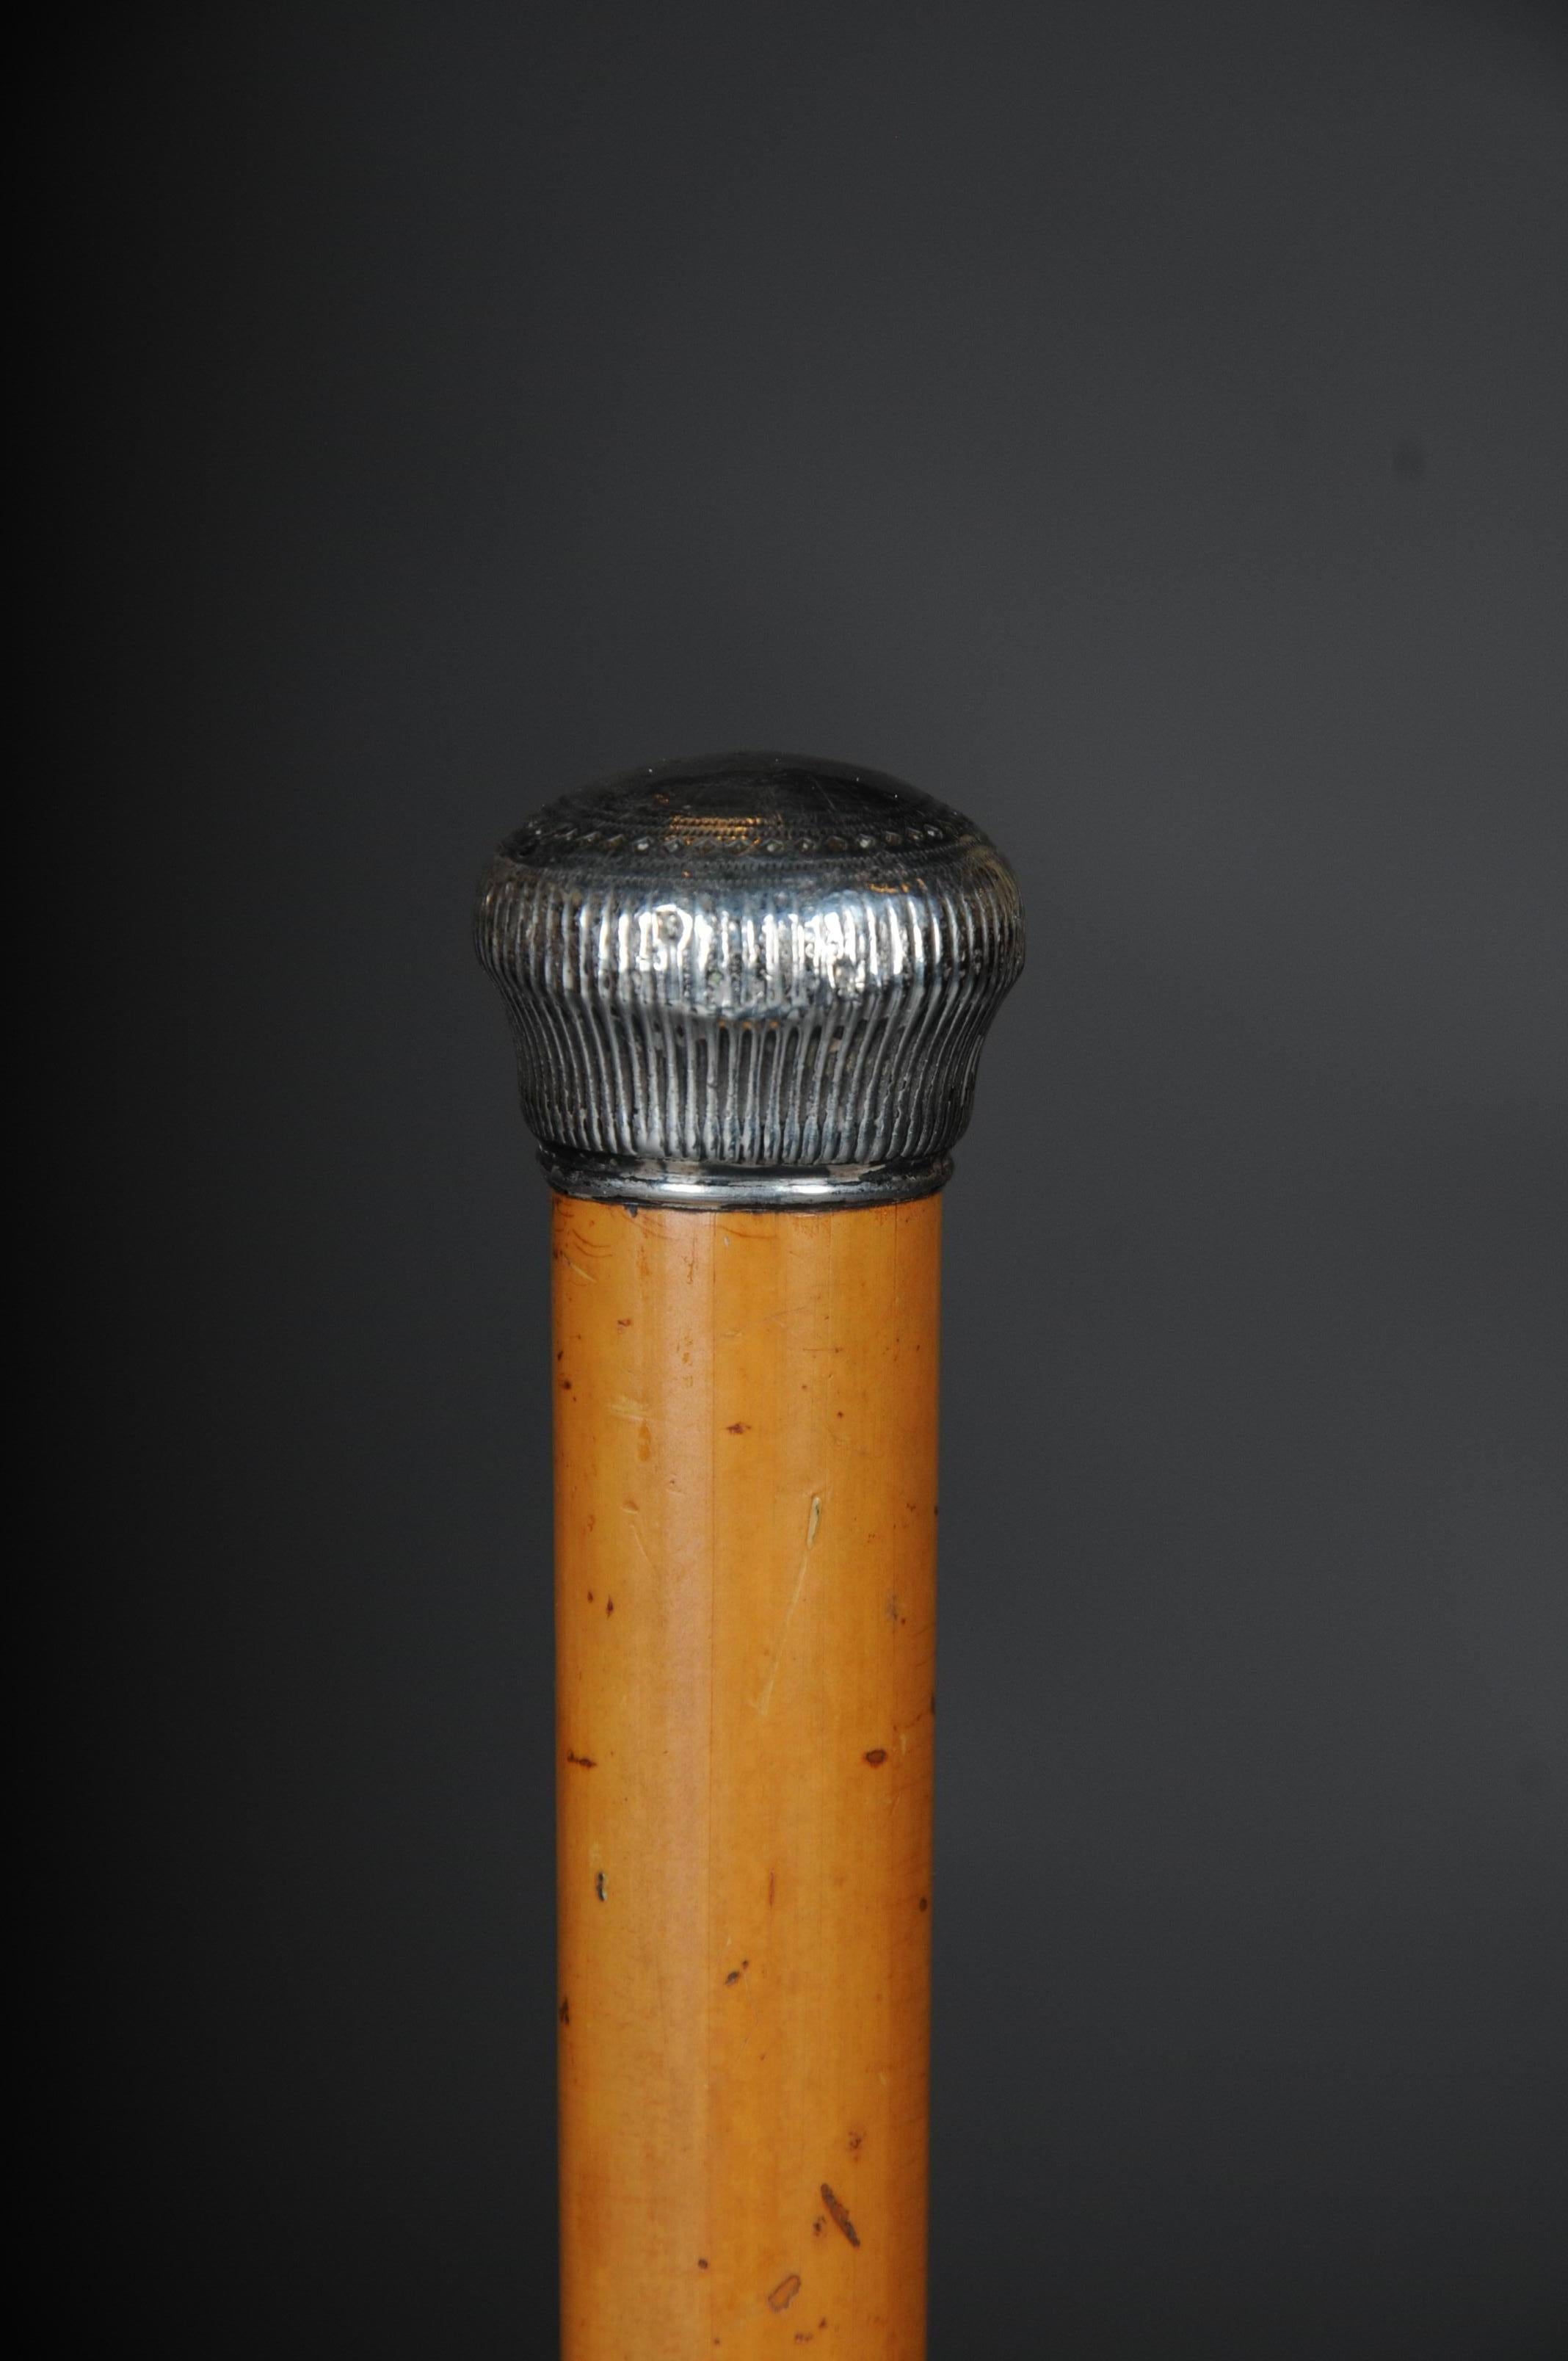 Solid birch wood with 800 silver mount, circa 19th century. The spout at the end of the stick is also made of 800 silver. Silver knob and spout with age-related signs of wear.
(V - 178).